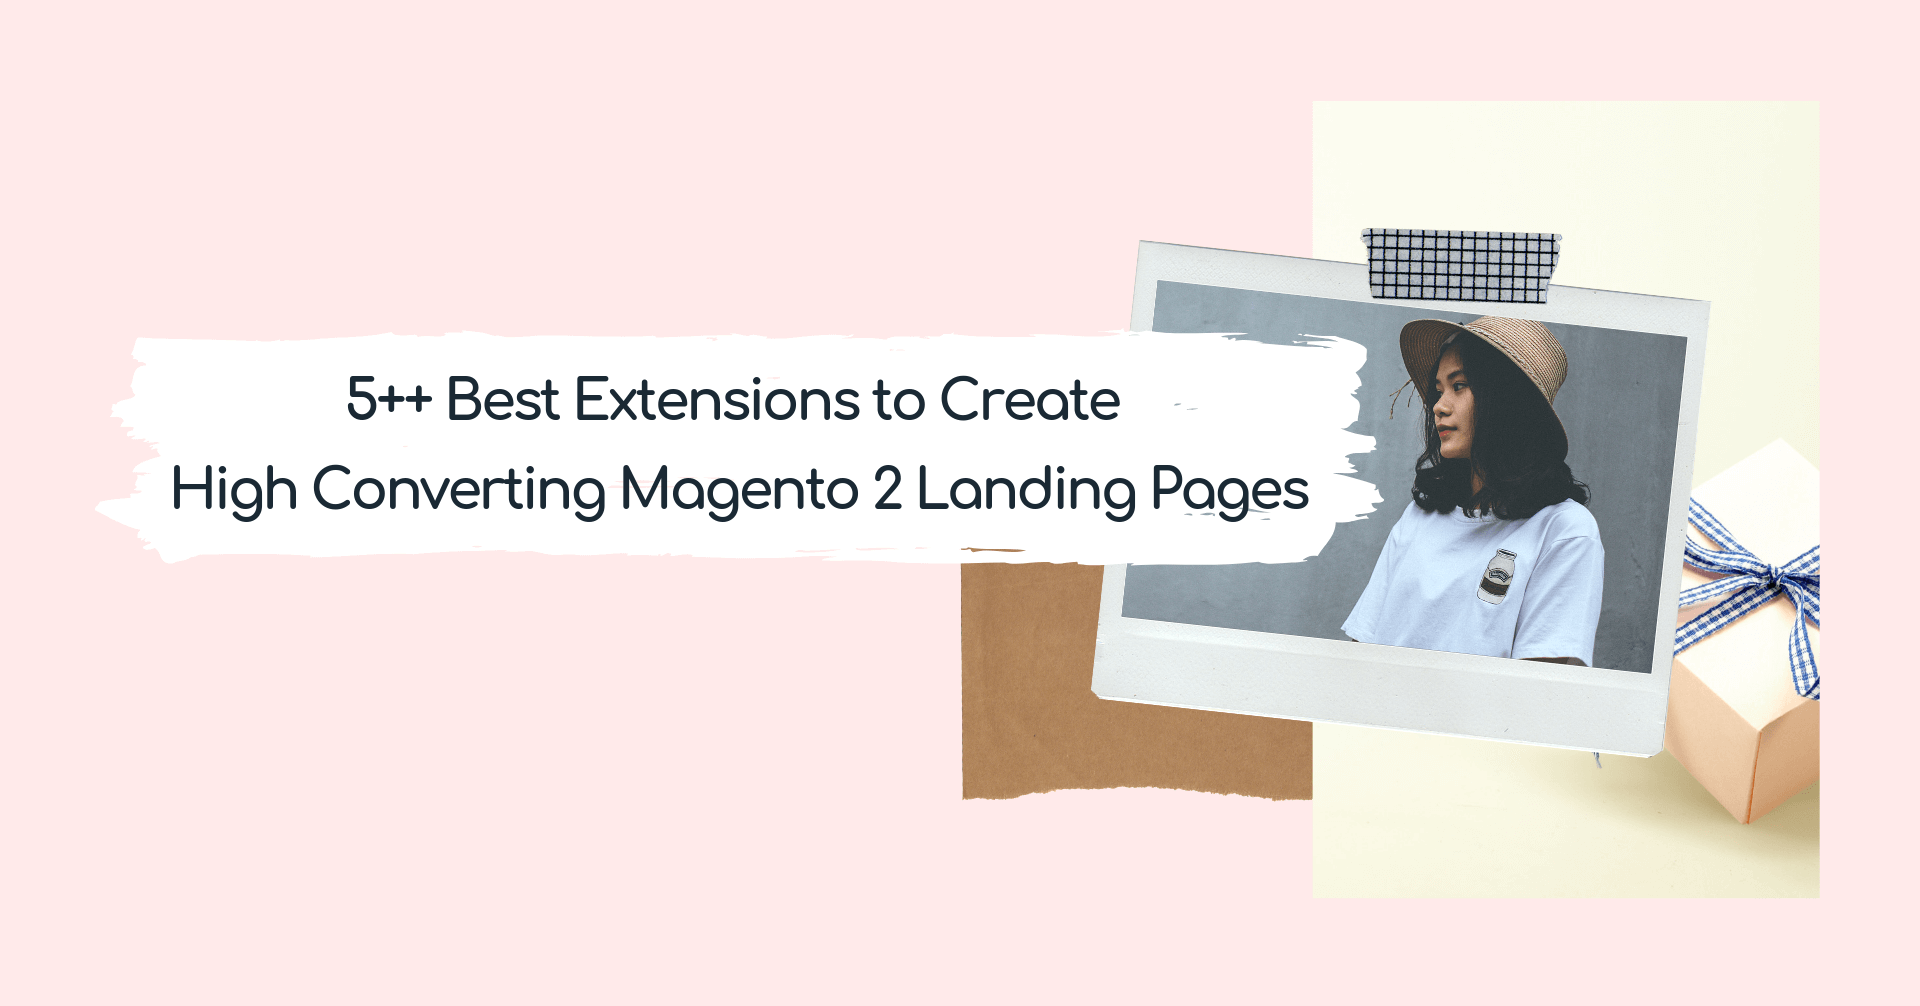 5++ Best Extensions To Create High Converting Magento 2 Landing Pages